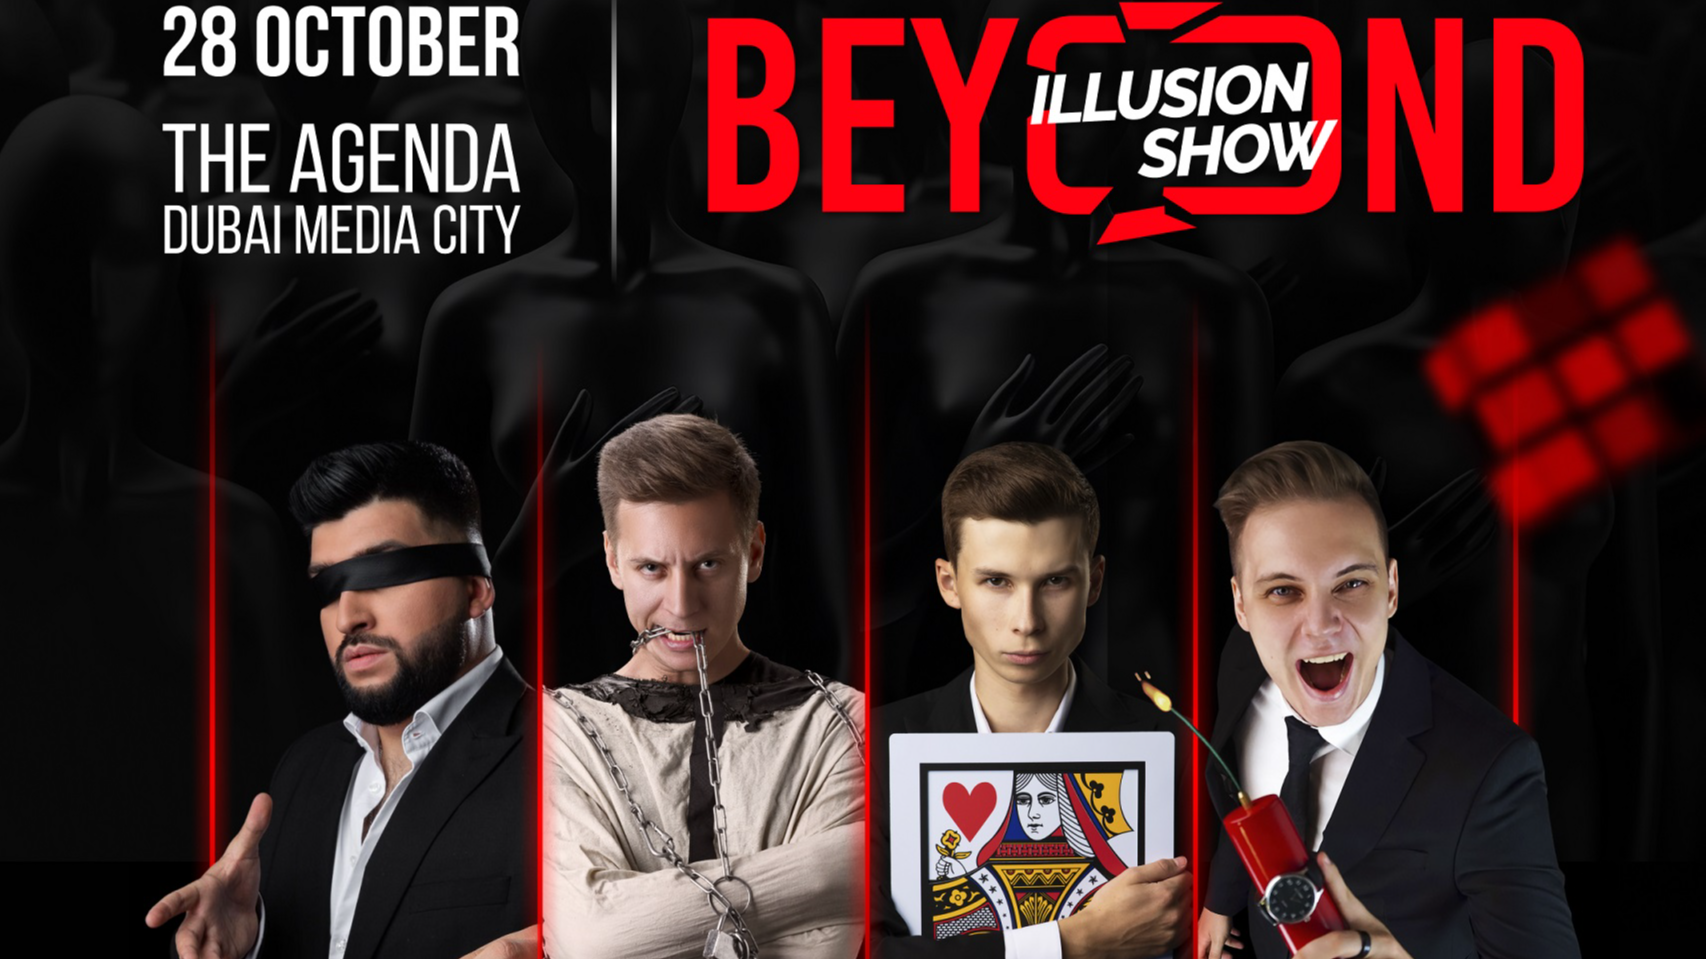 https://adgully.me/post/3681/beyond-the-great-illusion-show-is-coming-to-dubai-on-october-28th